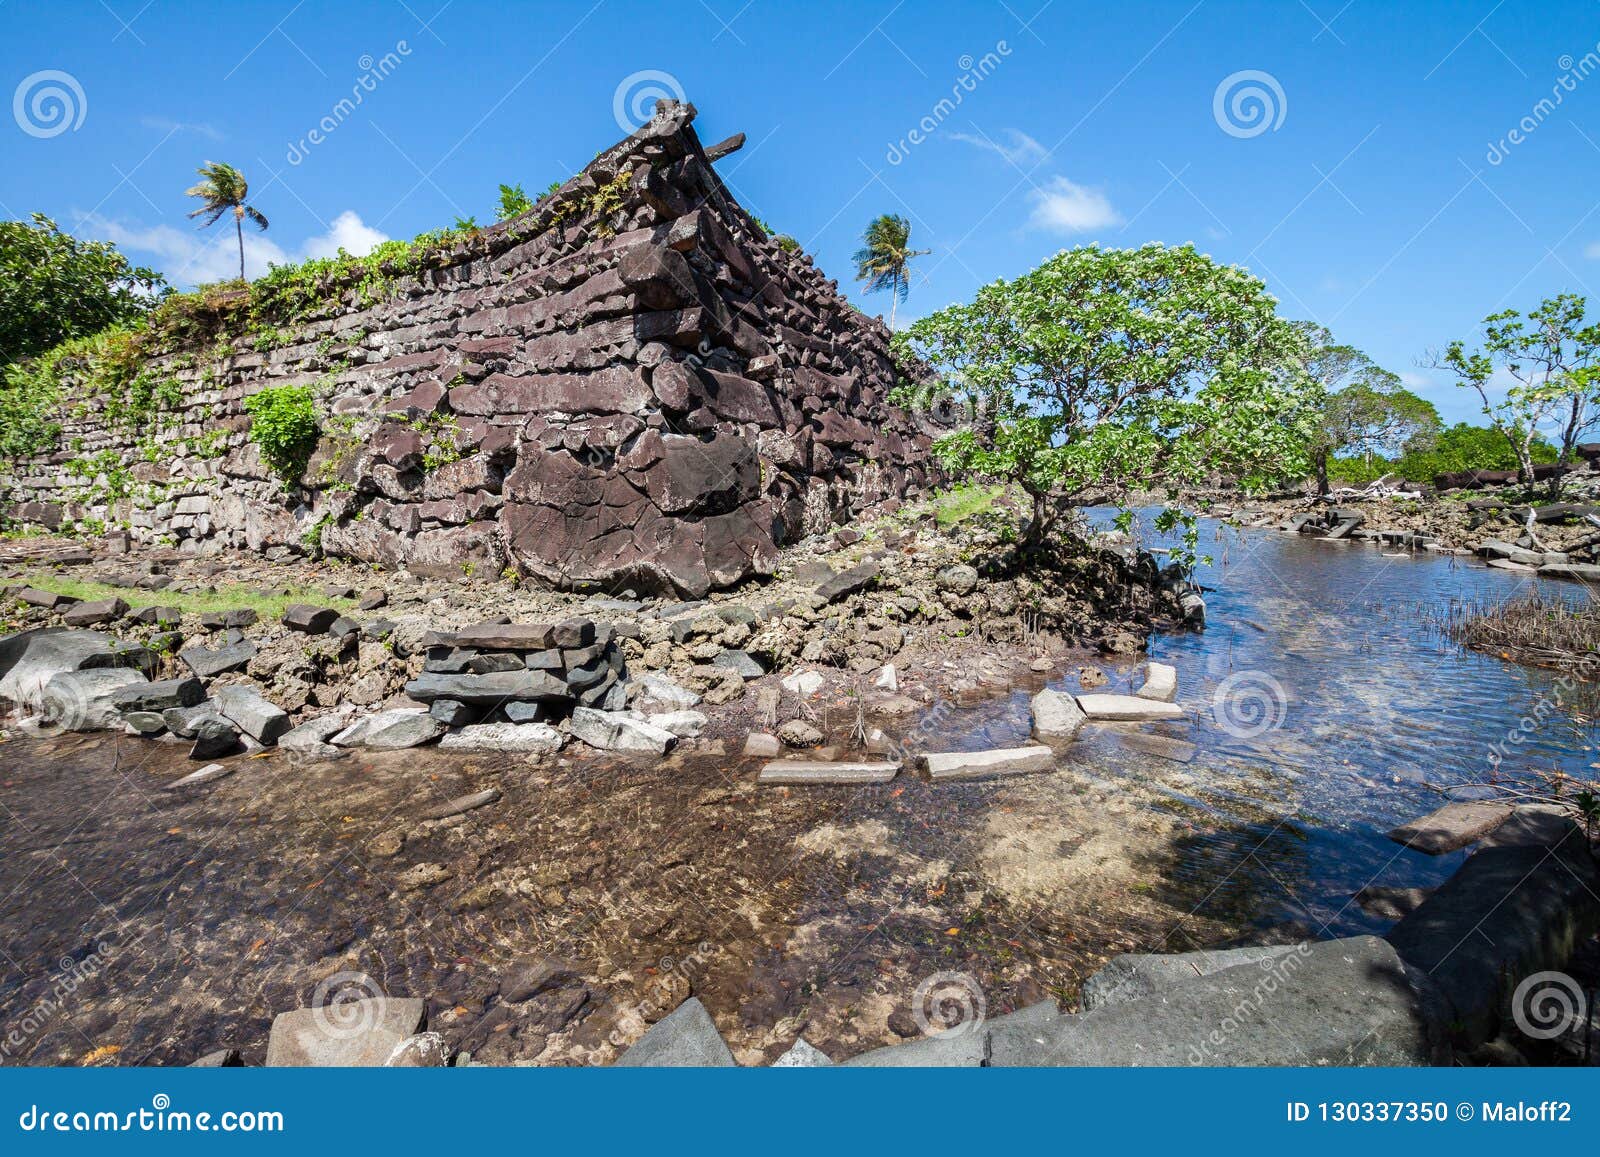 a channel and town walls in nan madol - prehistoric ruined stone city. pohnpei, micronesia, oceania.